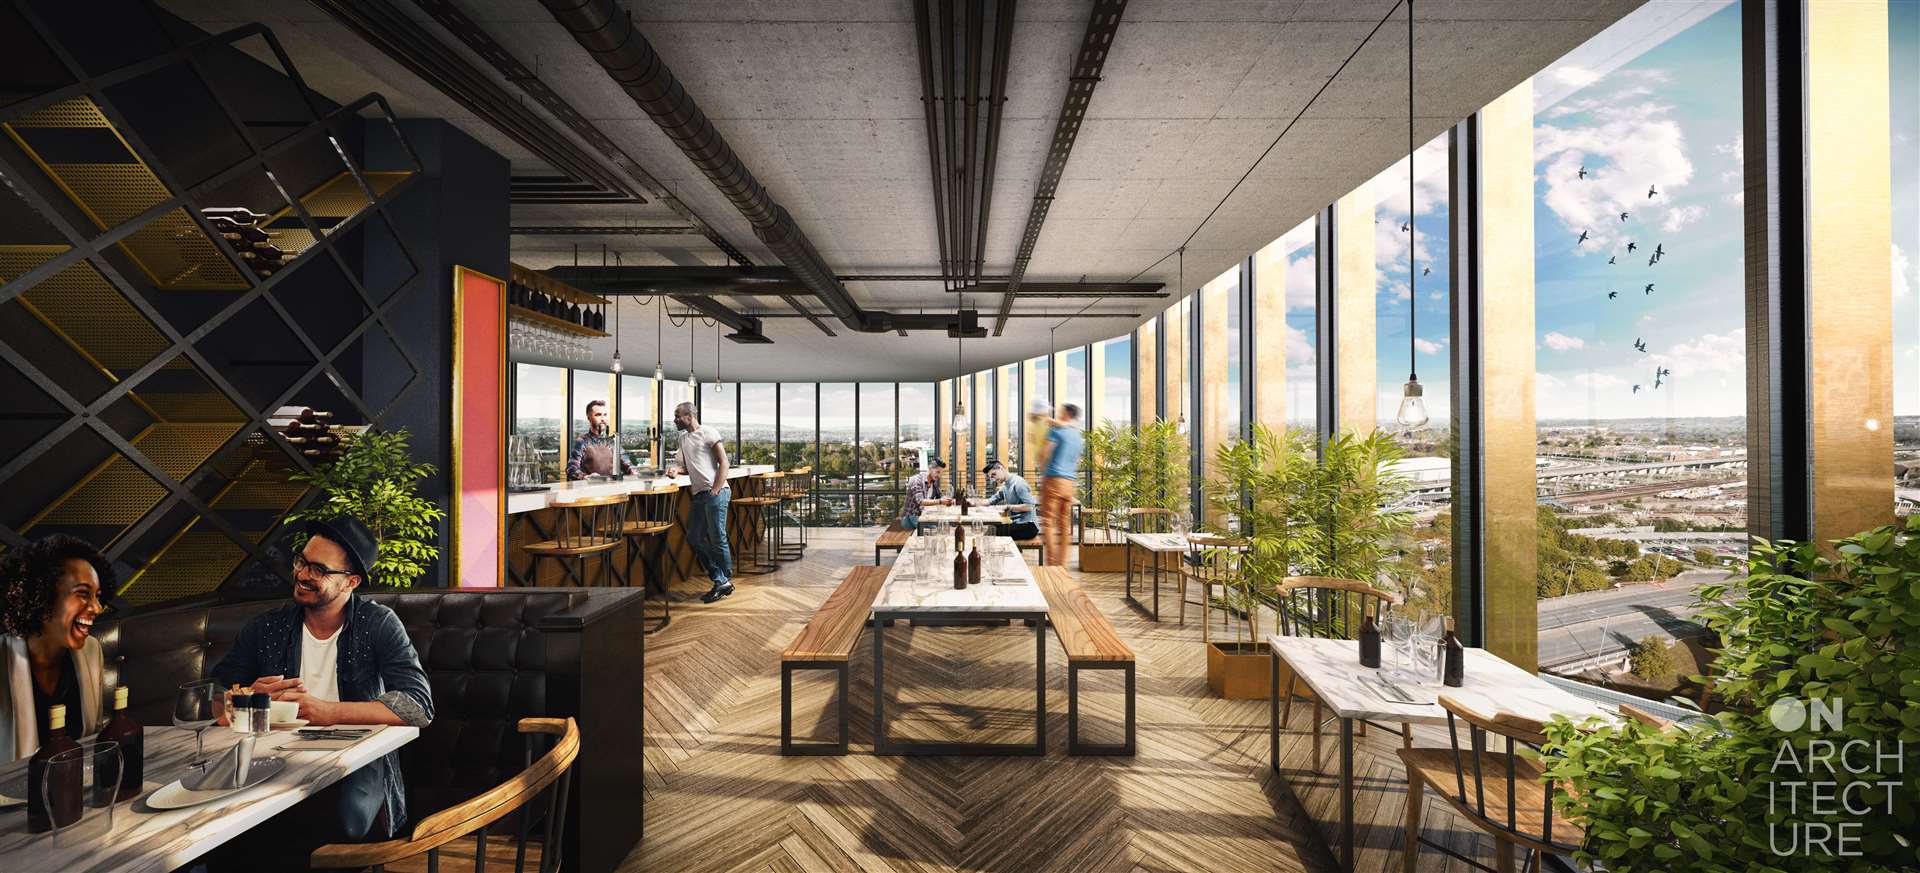 The rooftop restaurant will be situated in the top two floors of the 'Shard'